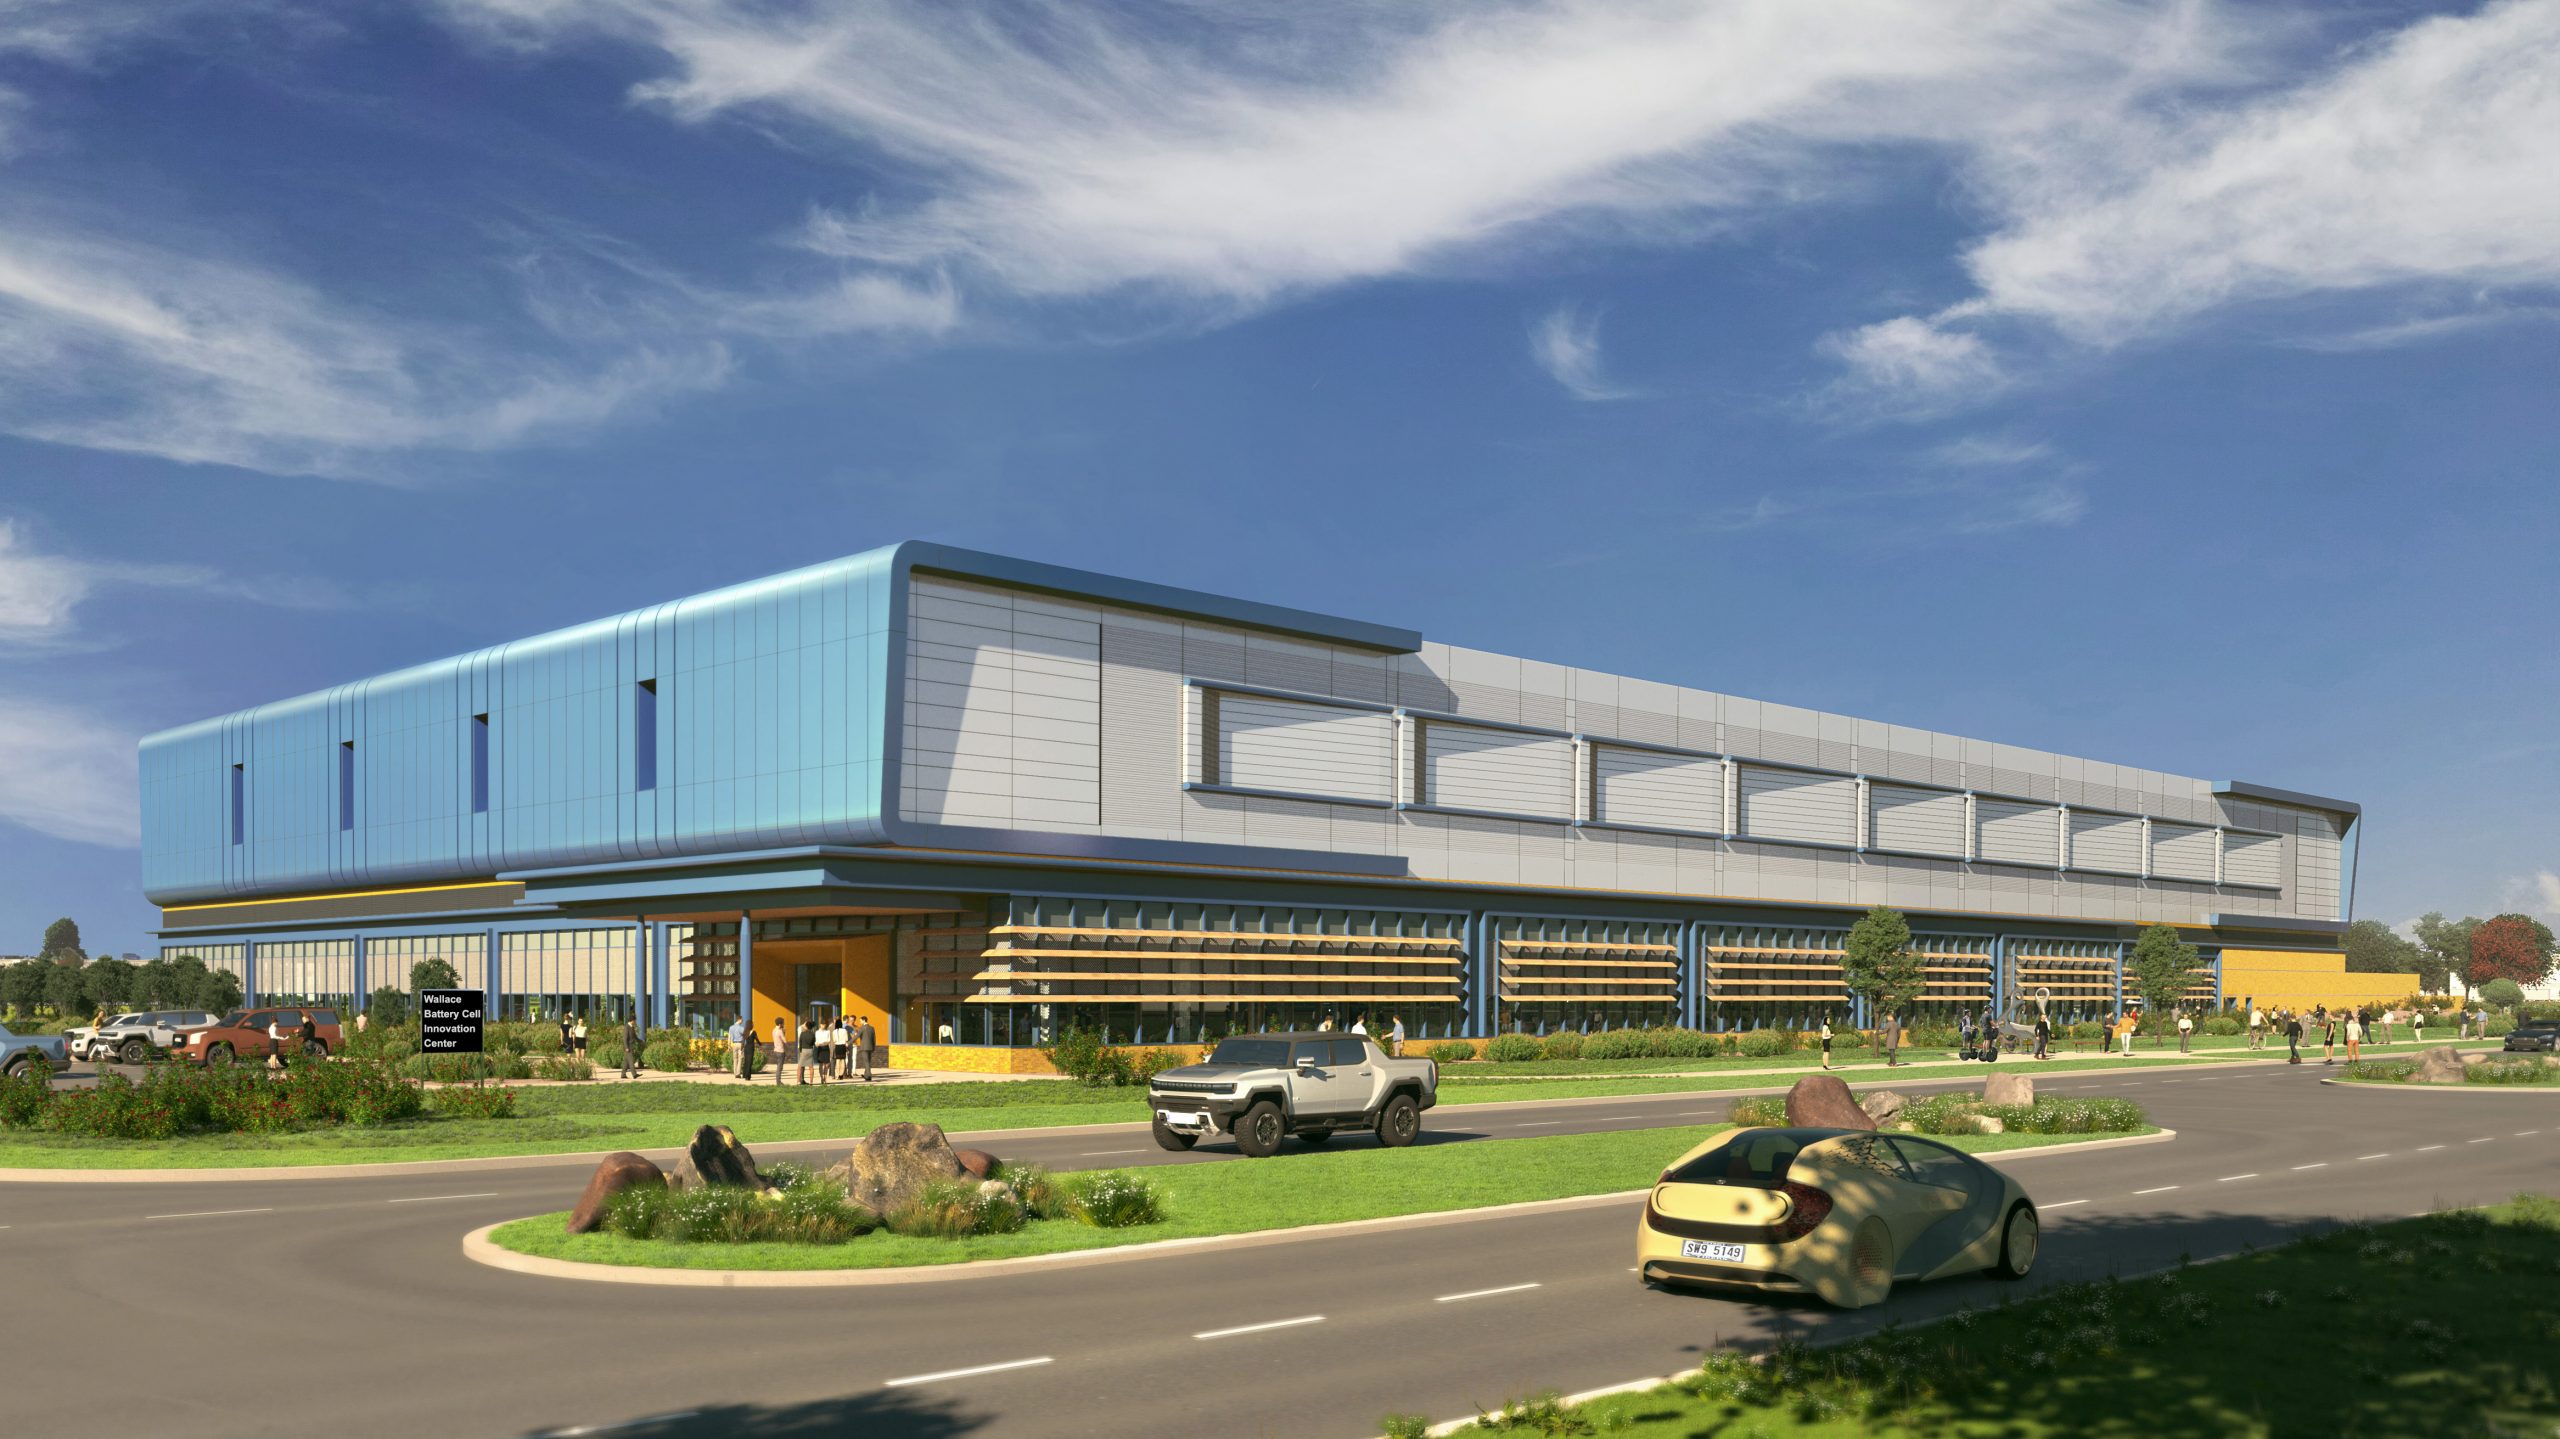 Architectural rendering of the completed first phase of GM’s Wallace Battery Cell Innovation Center. The Wallace Center will will accelerate new technologies like lithium-metal, silicon and solid-state batteries along with production methods that can quickly be deployed at battery cell manufacturing plants like GM’s joint ventures with LG Energy Solution in Lordstown, Ohio, and Spring Hill, Tennessee, along with other undisclosed locations.